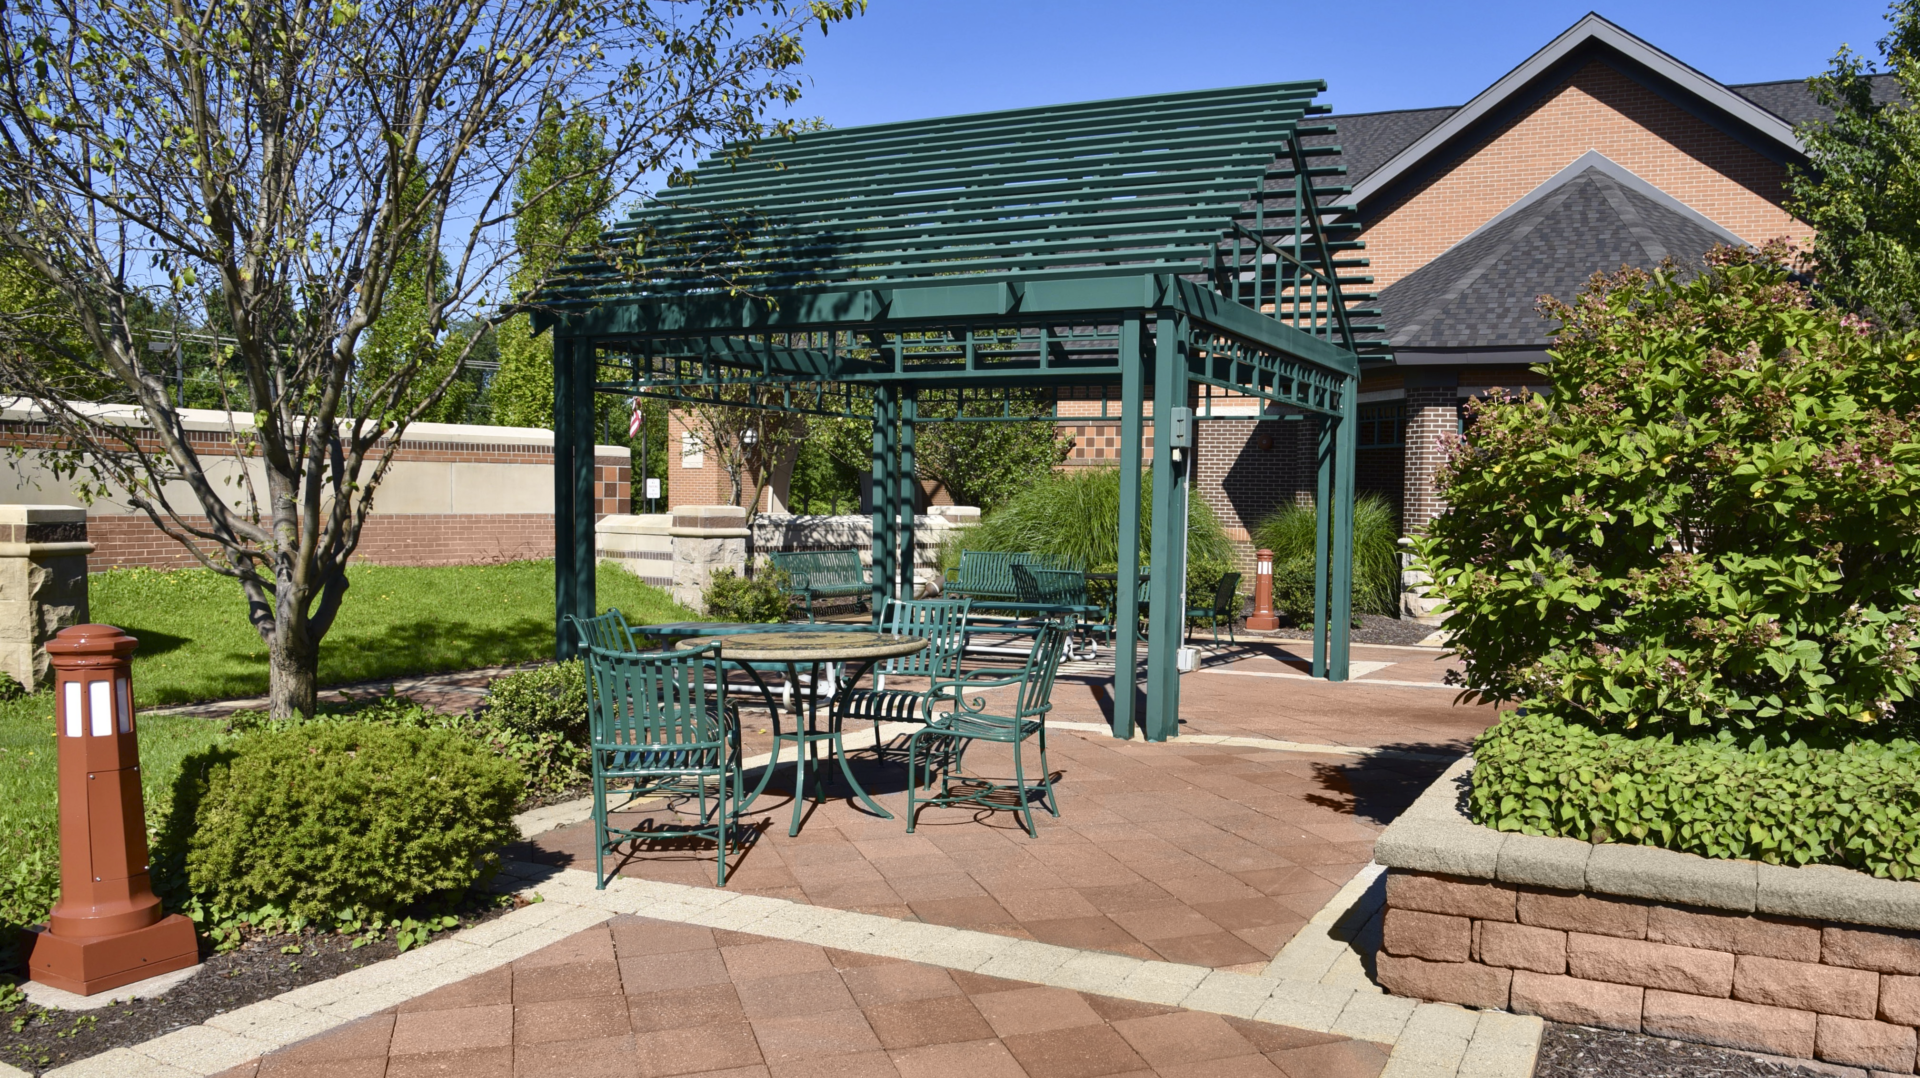 Picture of the Harris Branch patio after the Harris Patio furniture restoration.